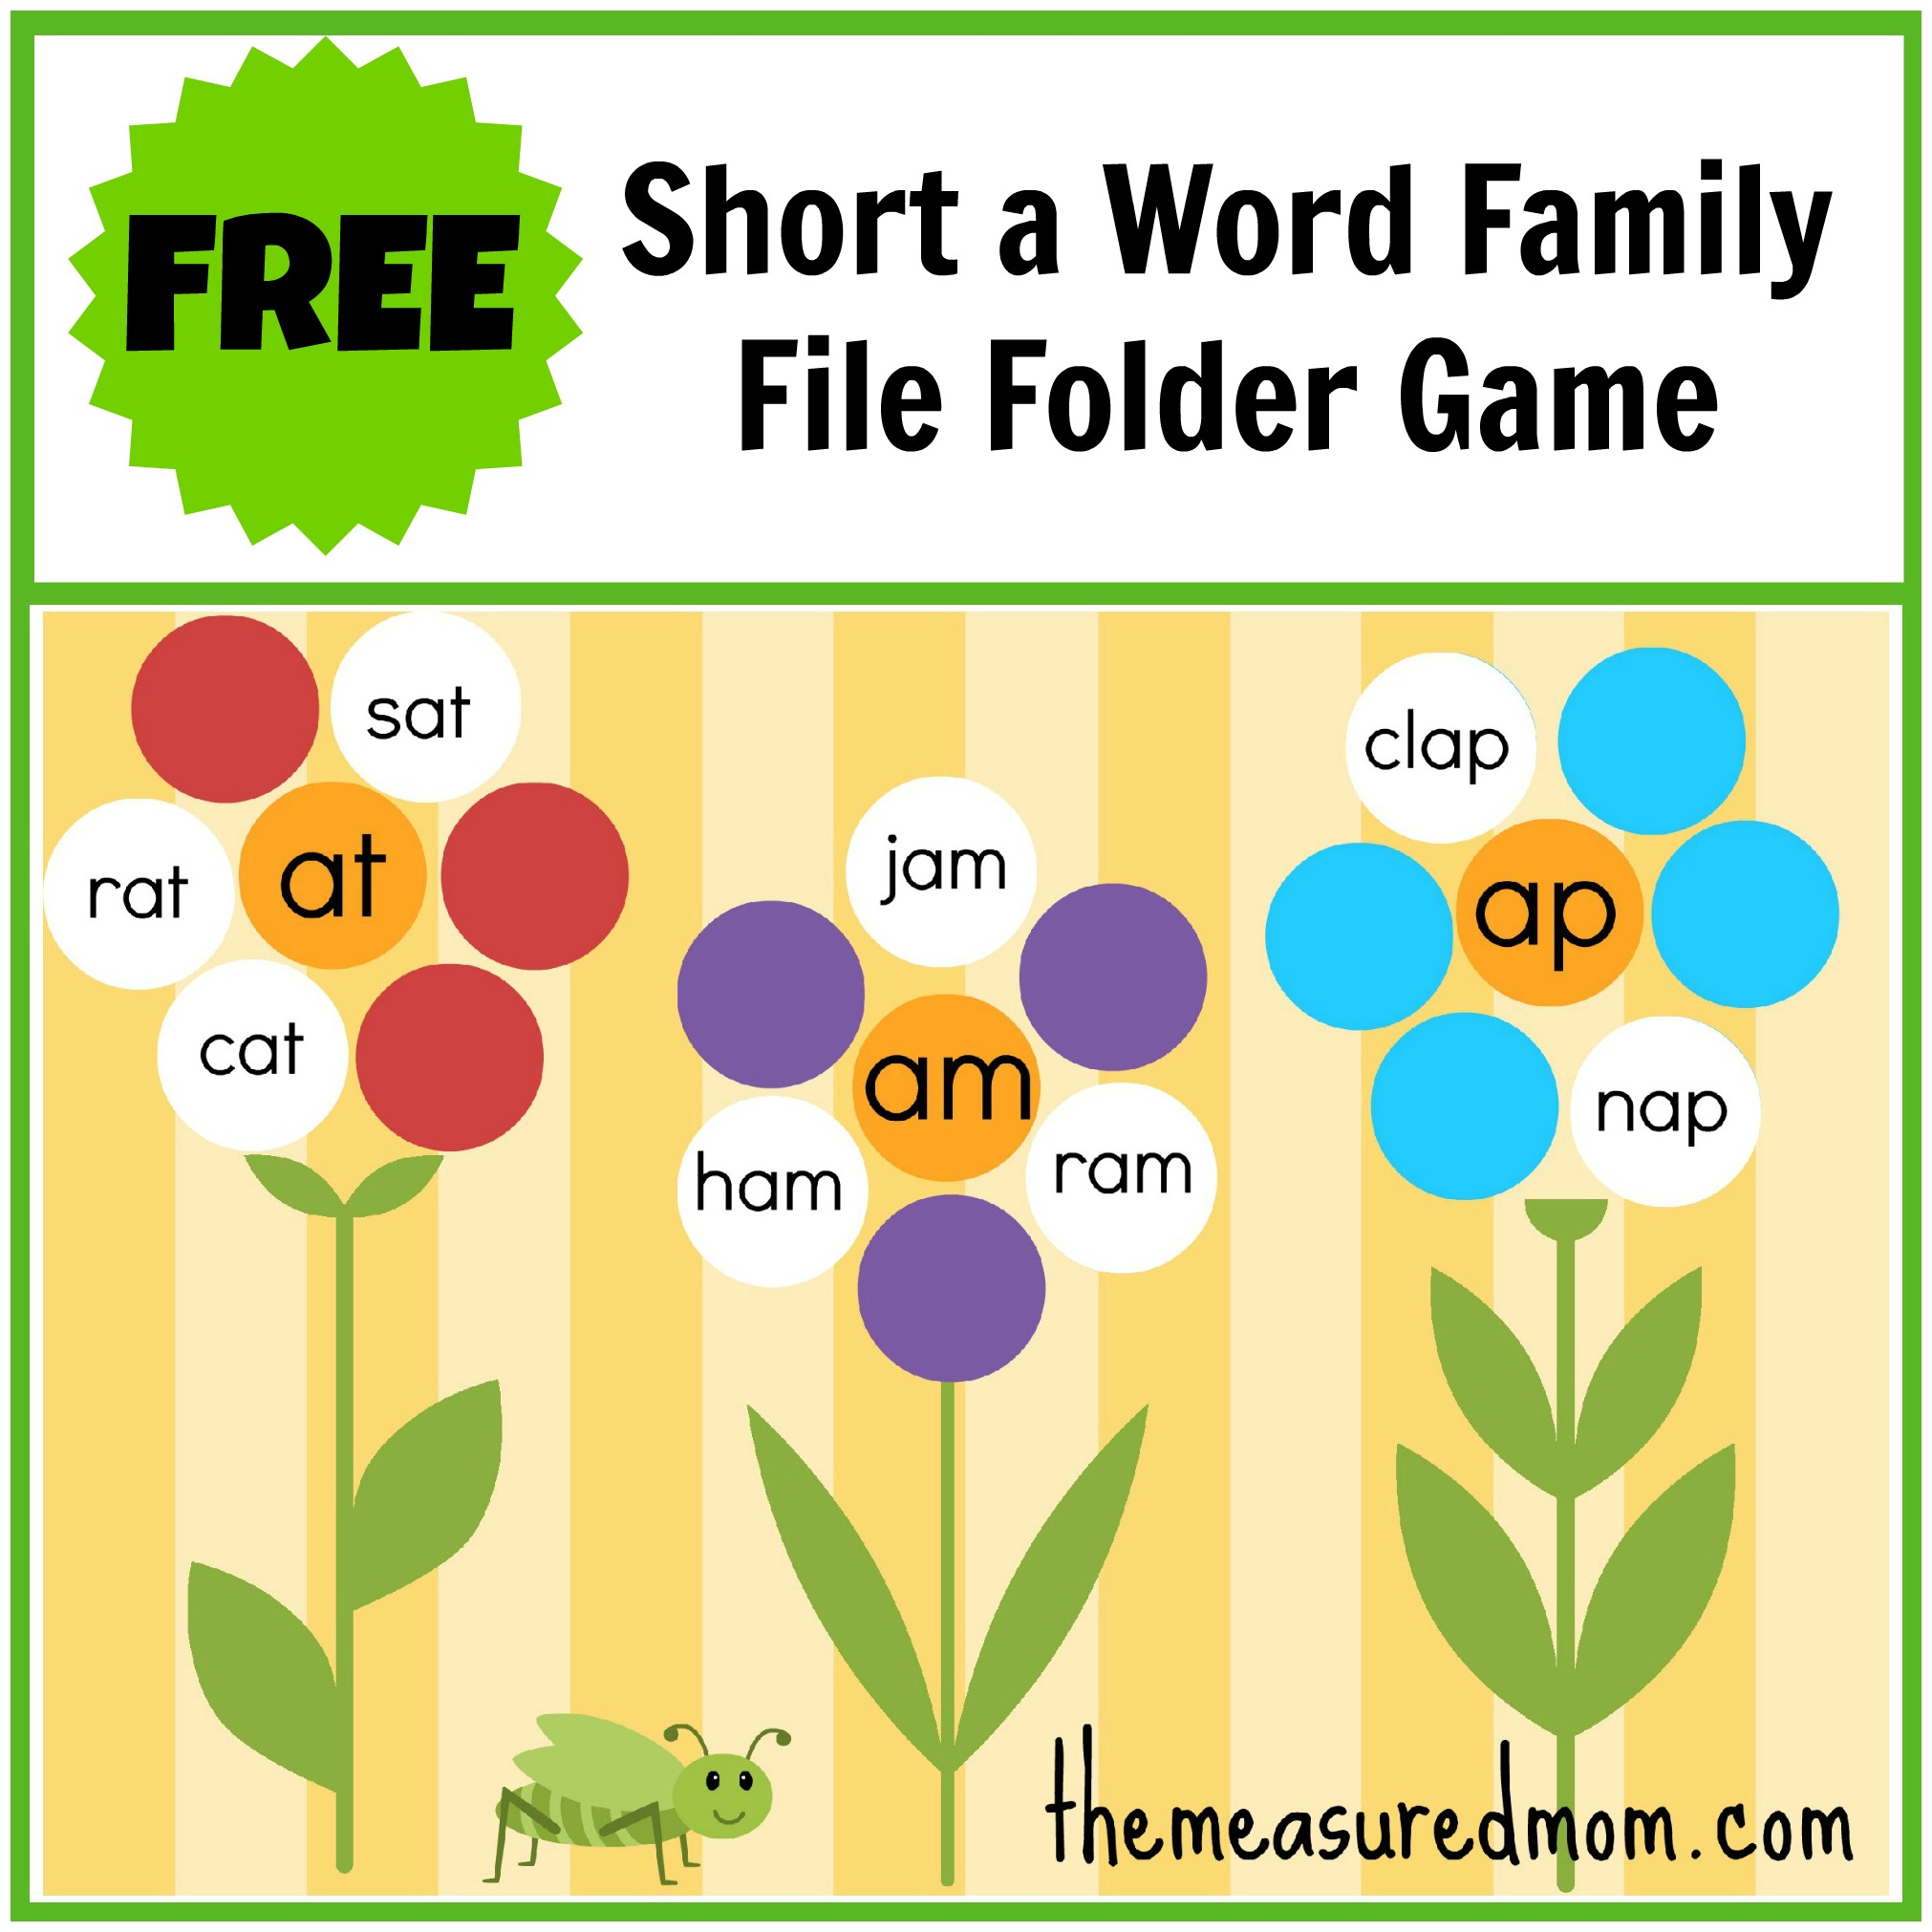 Free Word Family File Folder Game: Short A - The Measured Mom - Free Printable Fall File Folder Games